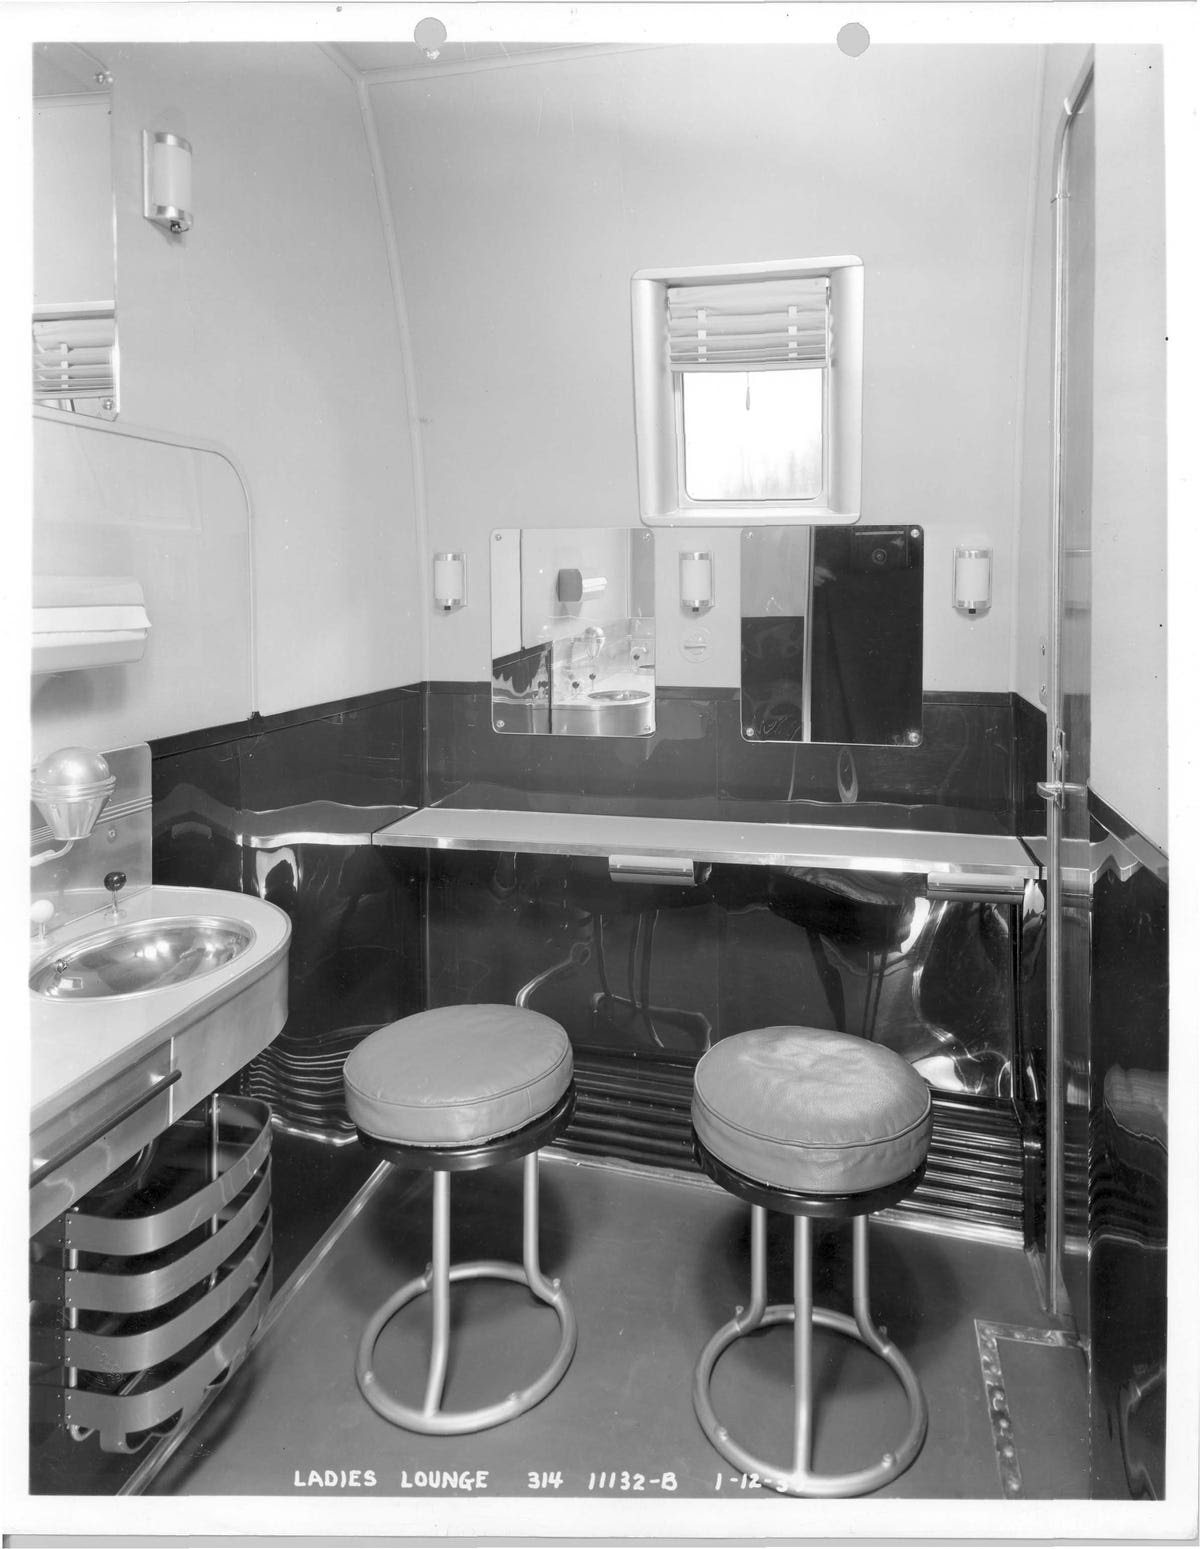 The                                                             ladies lounge                                                             had stools                                                             where female                                                             passengers                                                             could sit and                                                             do their                                                             makeup. 